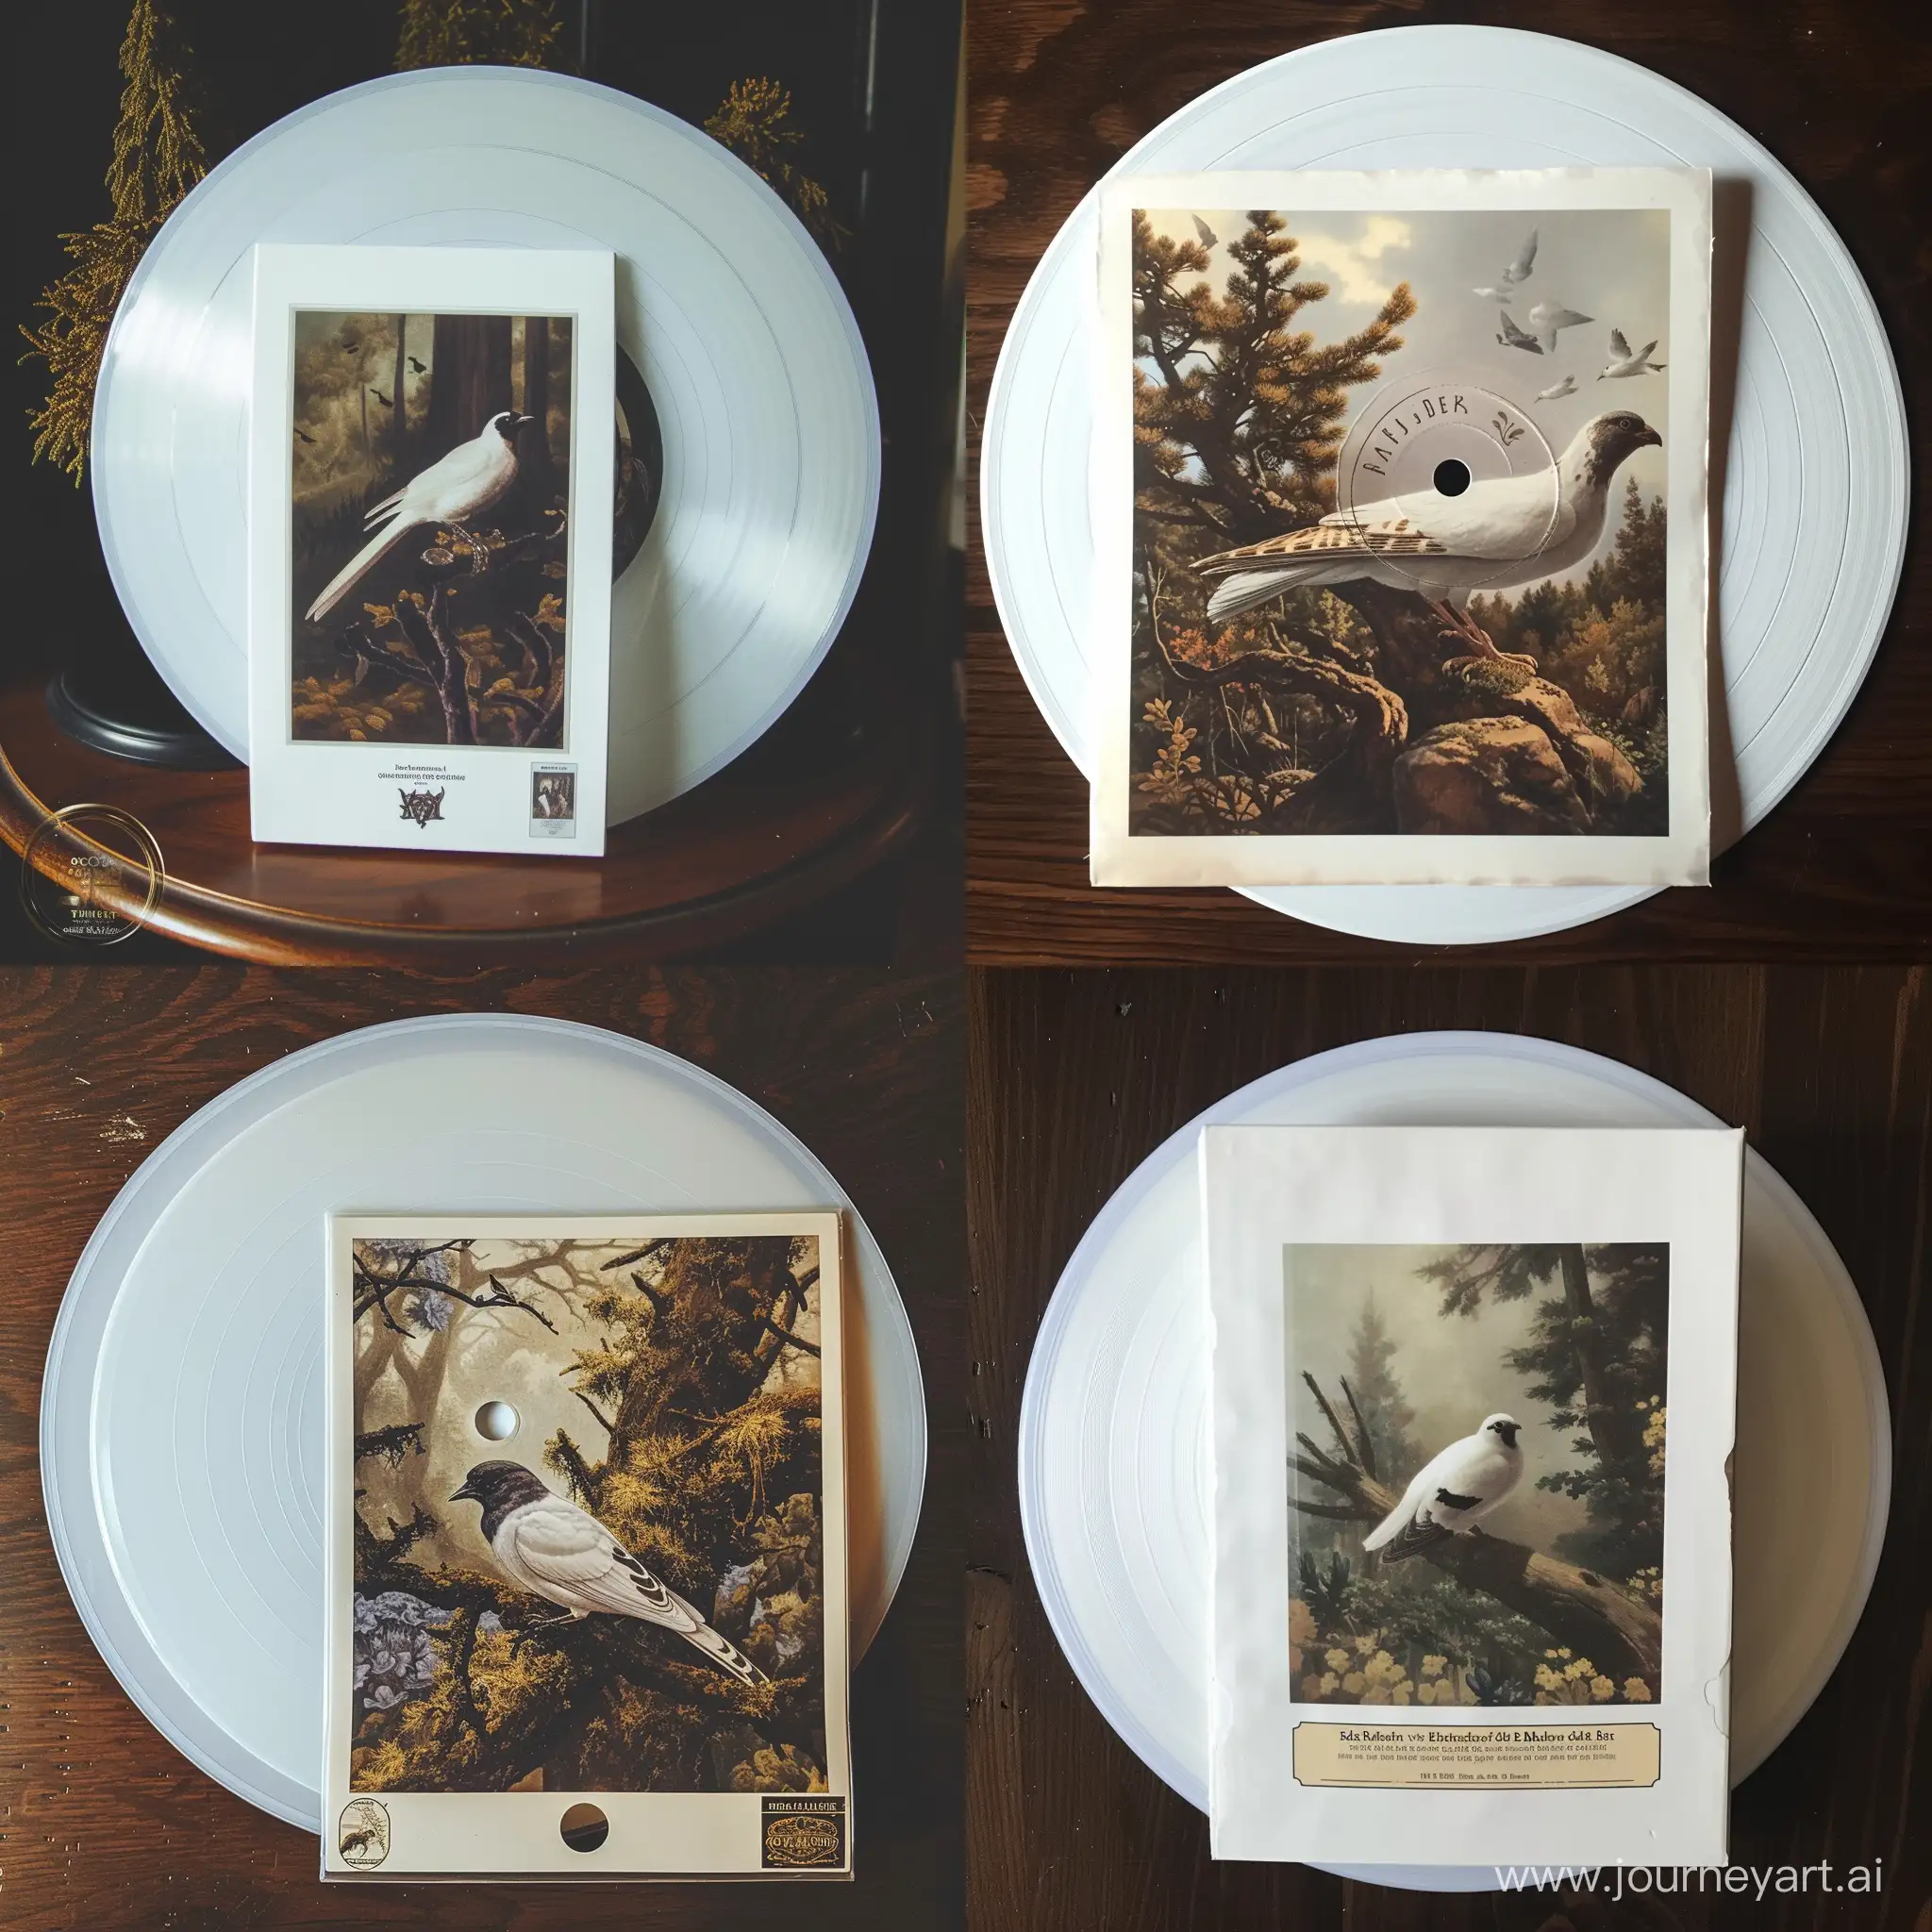 there is a white vinyl with a picture of a bird on it, inspired by Balthasar van der Ast, octopath voyager, wolff olins |, mark brooks and brad kunkle, kingdoms of ether, bio-inspired design, cypresses, editor's pickup, inspired by Andrew Wyeth, parlor